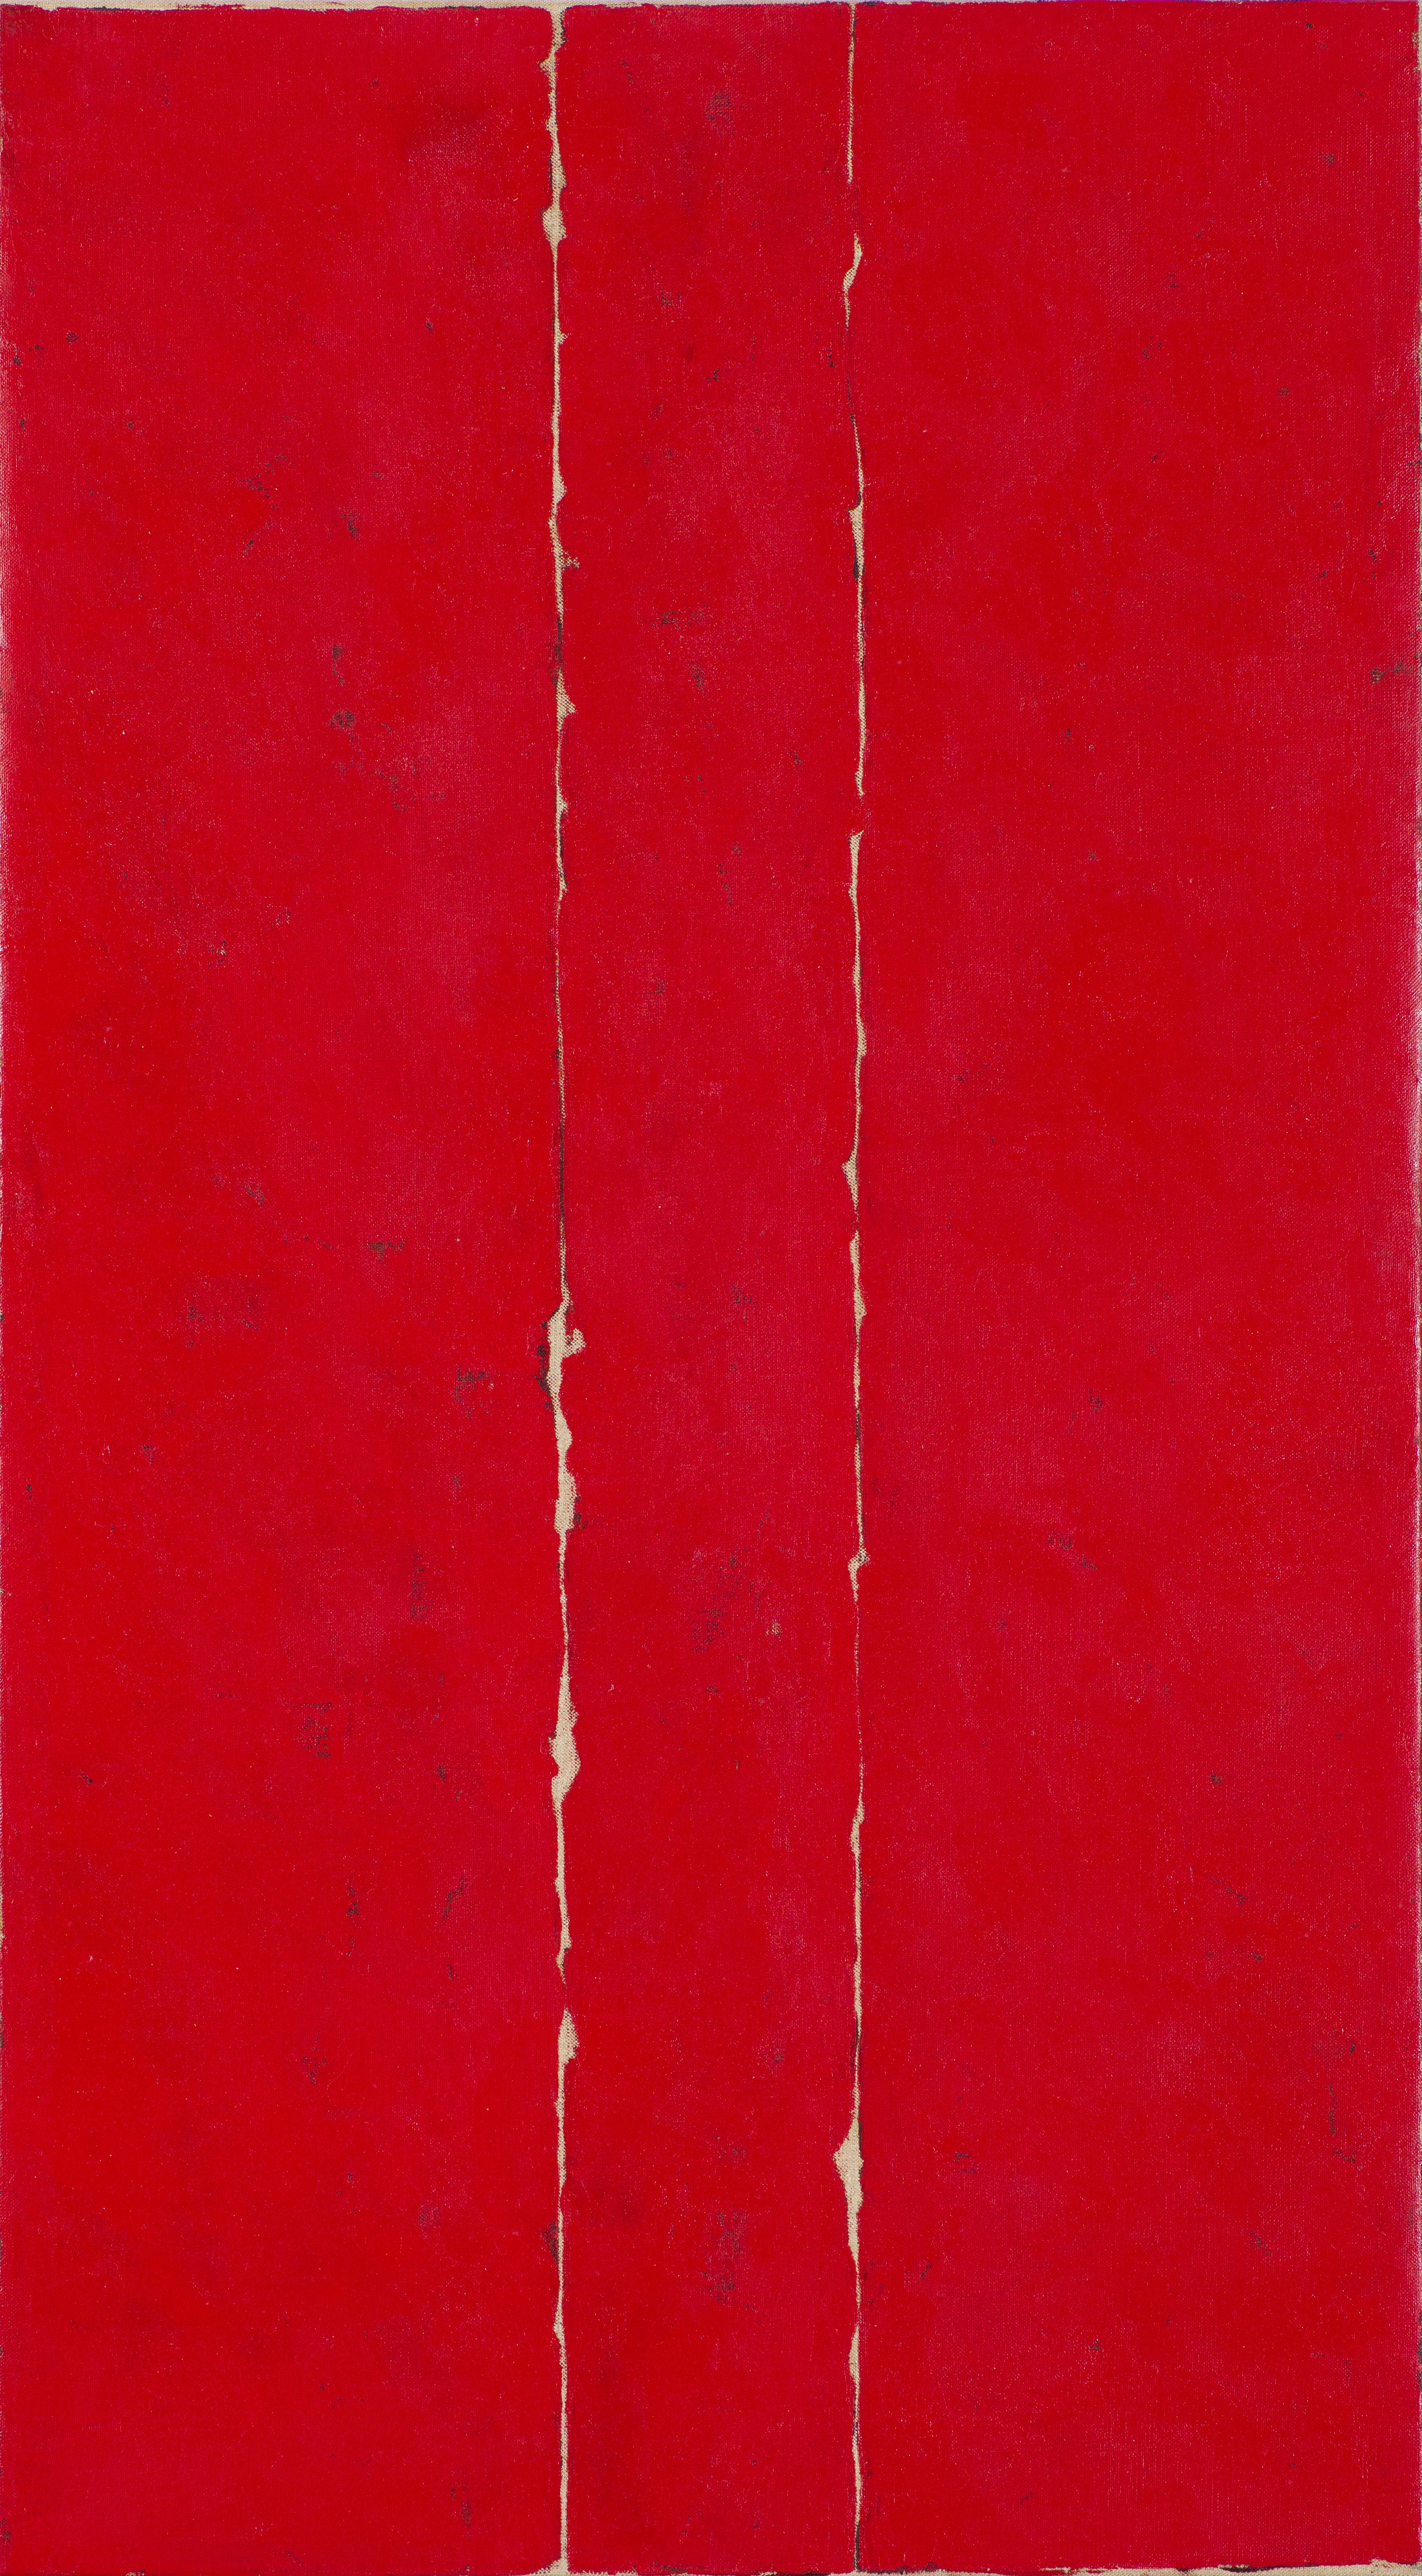 Mala Breuer Abstract Painting - 1978 (red)